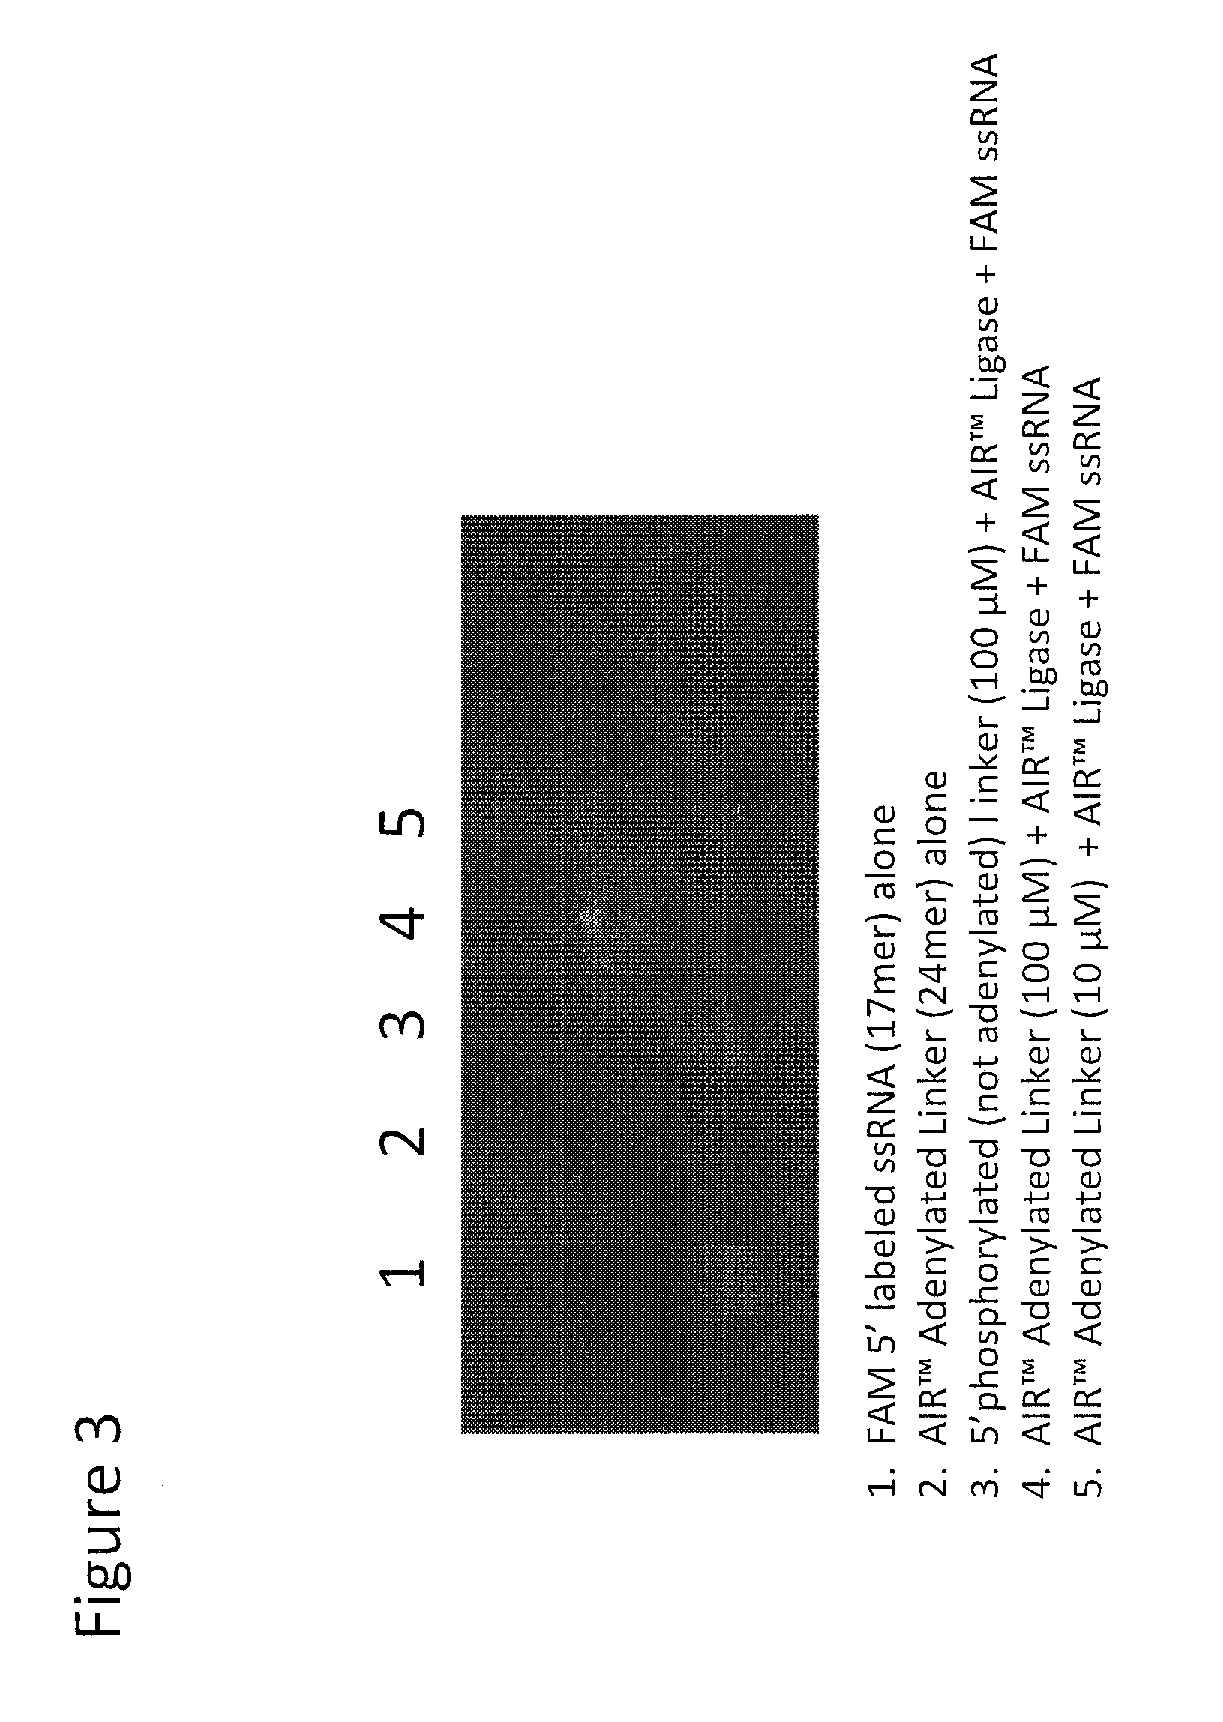 Oligonucleotide ligation, barcoding and methods and compositions for improving data quality and throughput using massively parallel sequencing